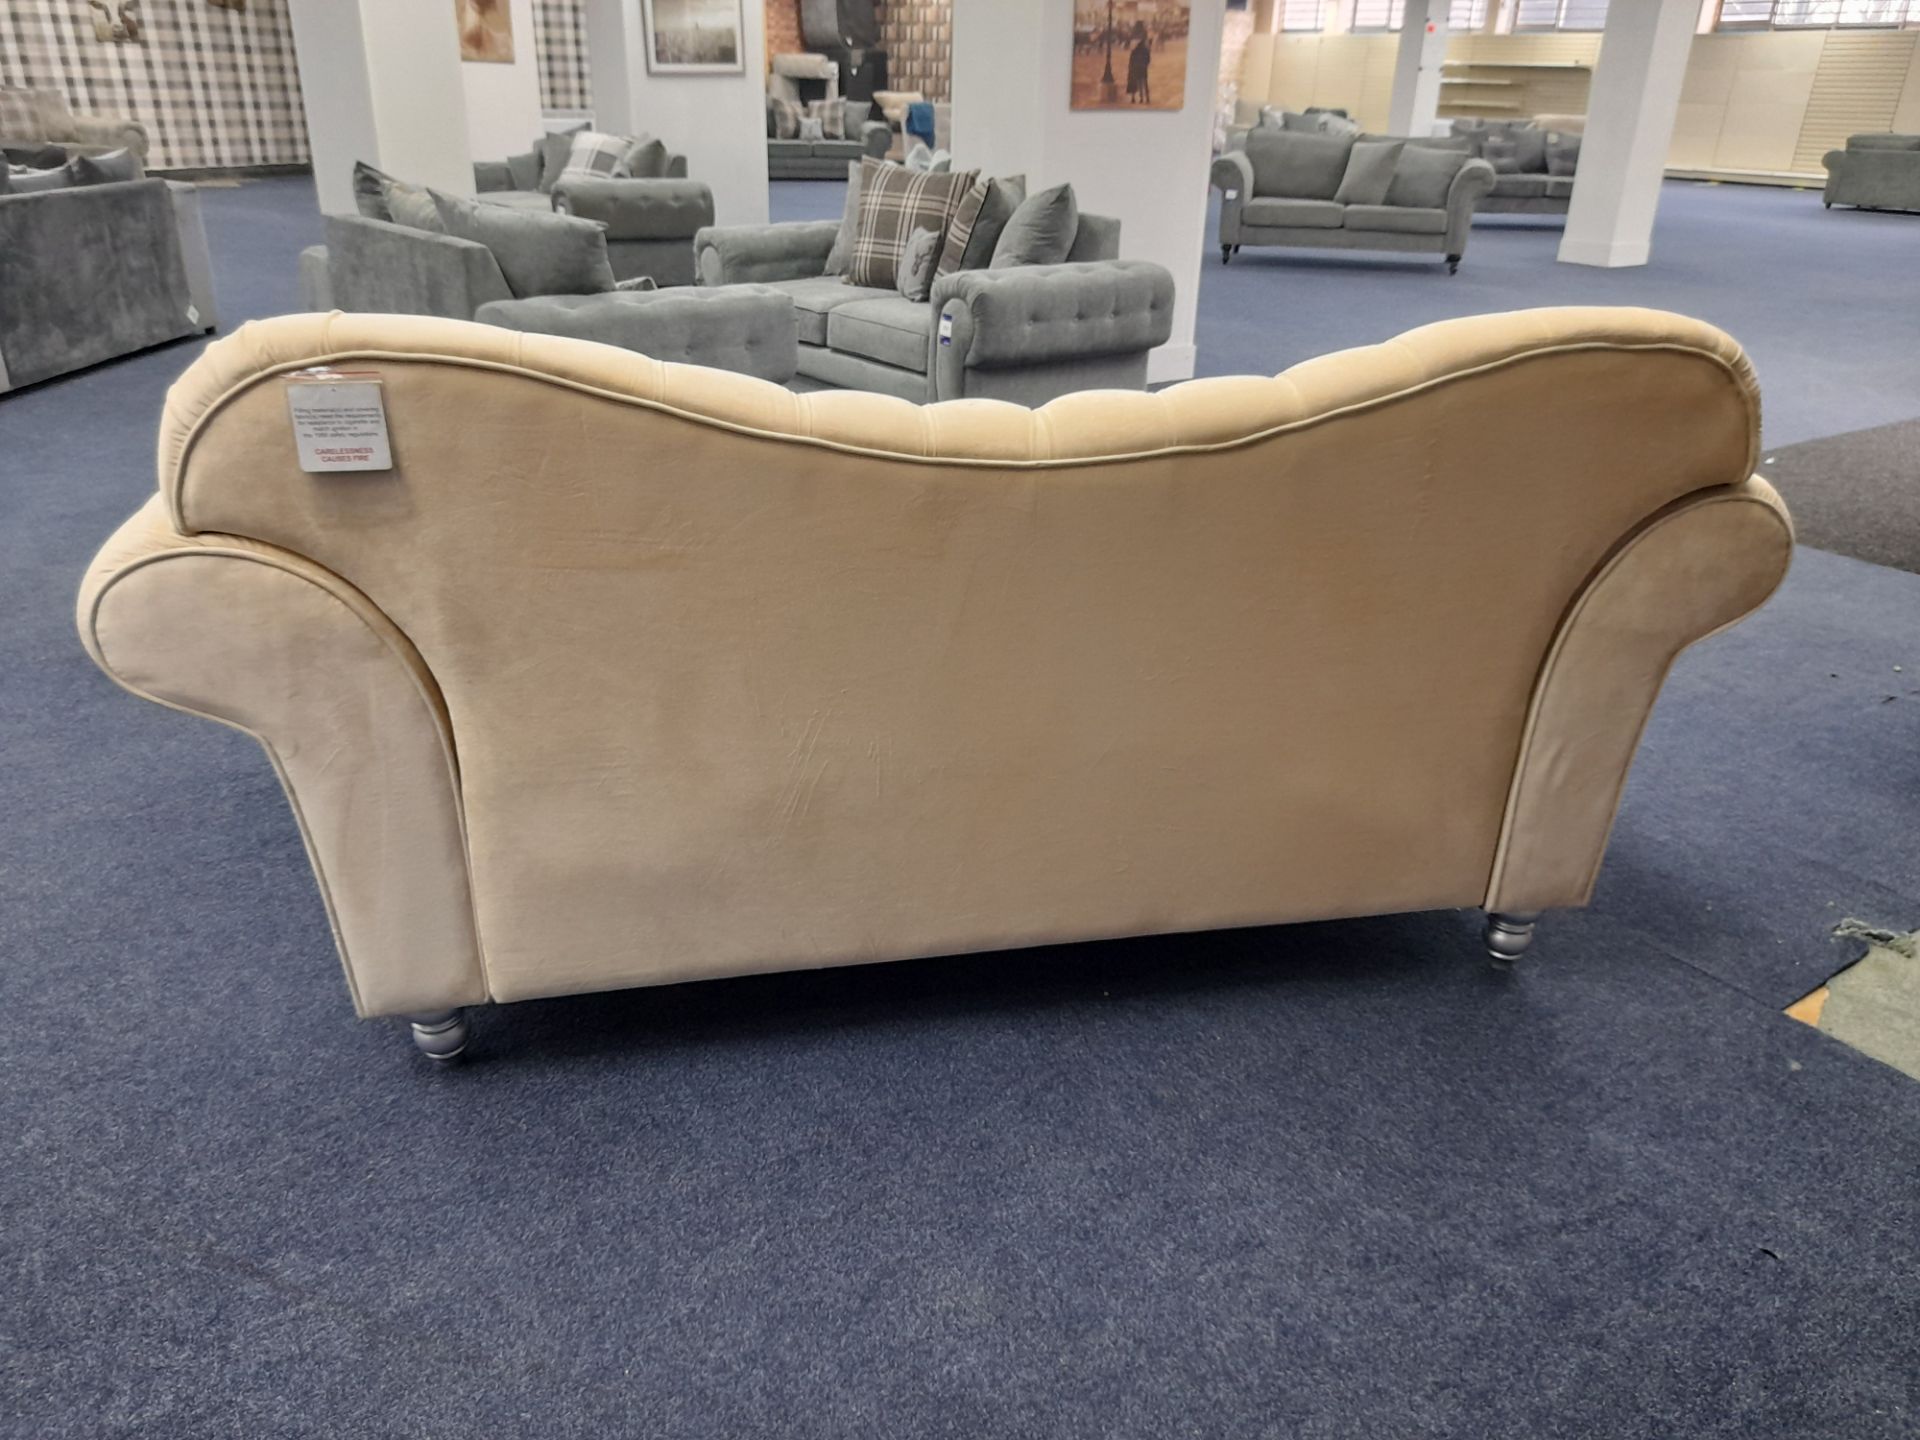 Cream fabric upholstered, 3 seater, chesterfield type sofa (Ex-Display) - Image 5 of 7